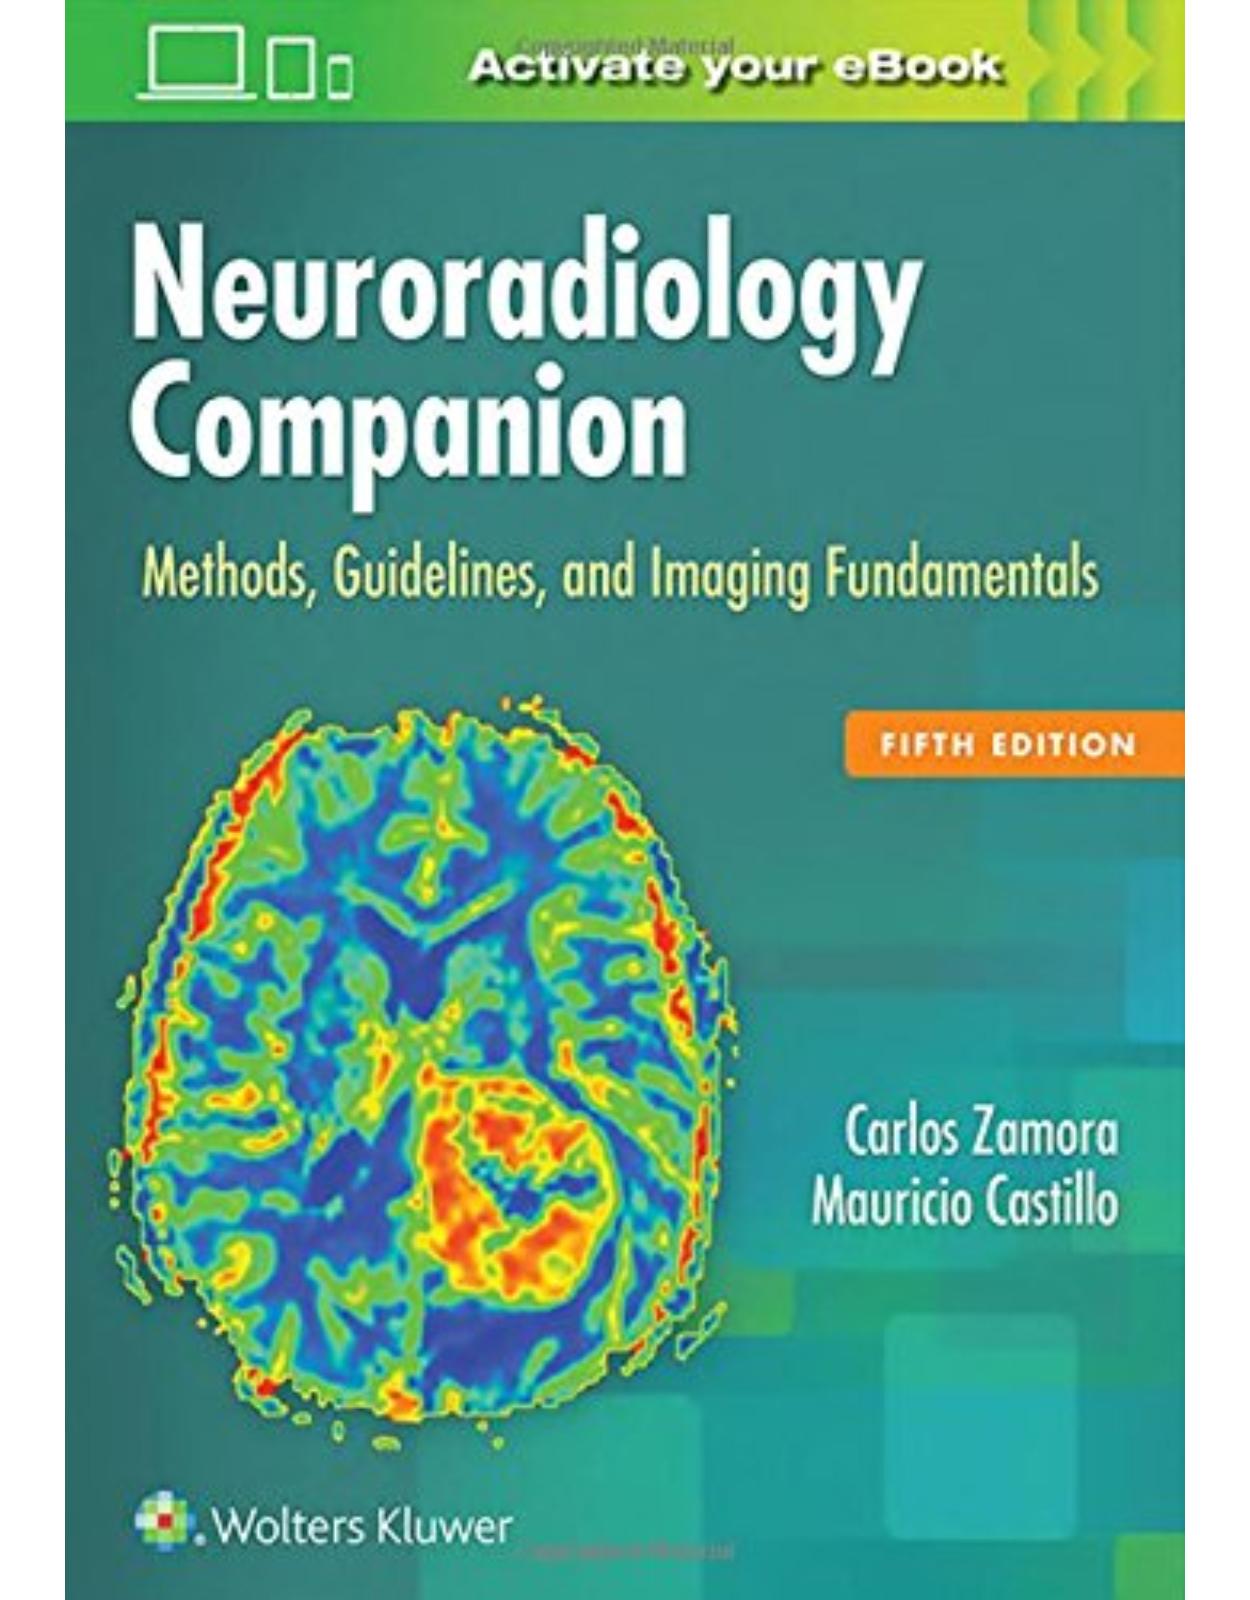 Neuroradiology Companion, 5e: Methods, Guidelines, and Imaging Fundamentals